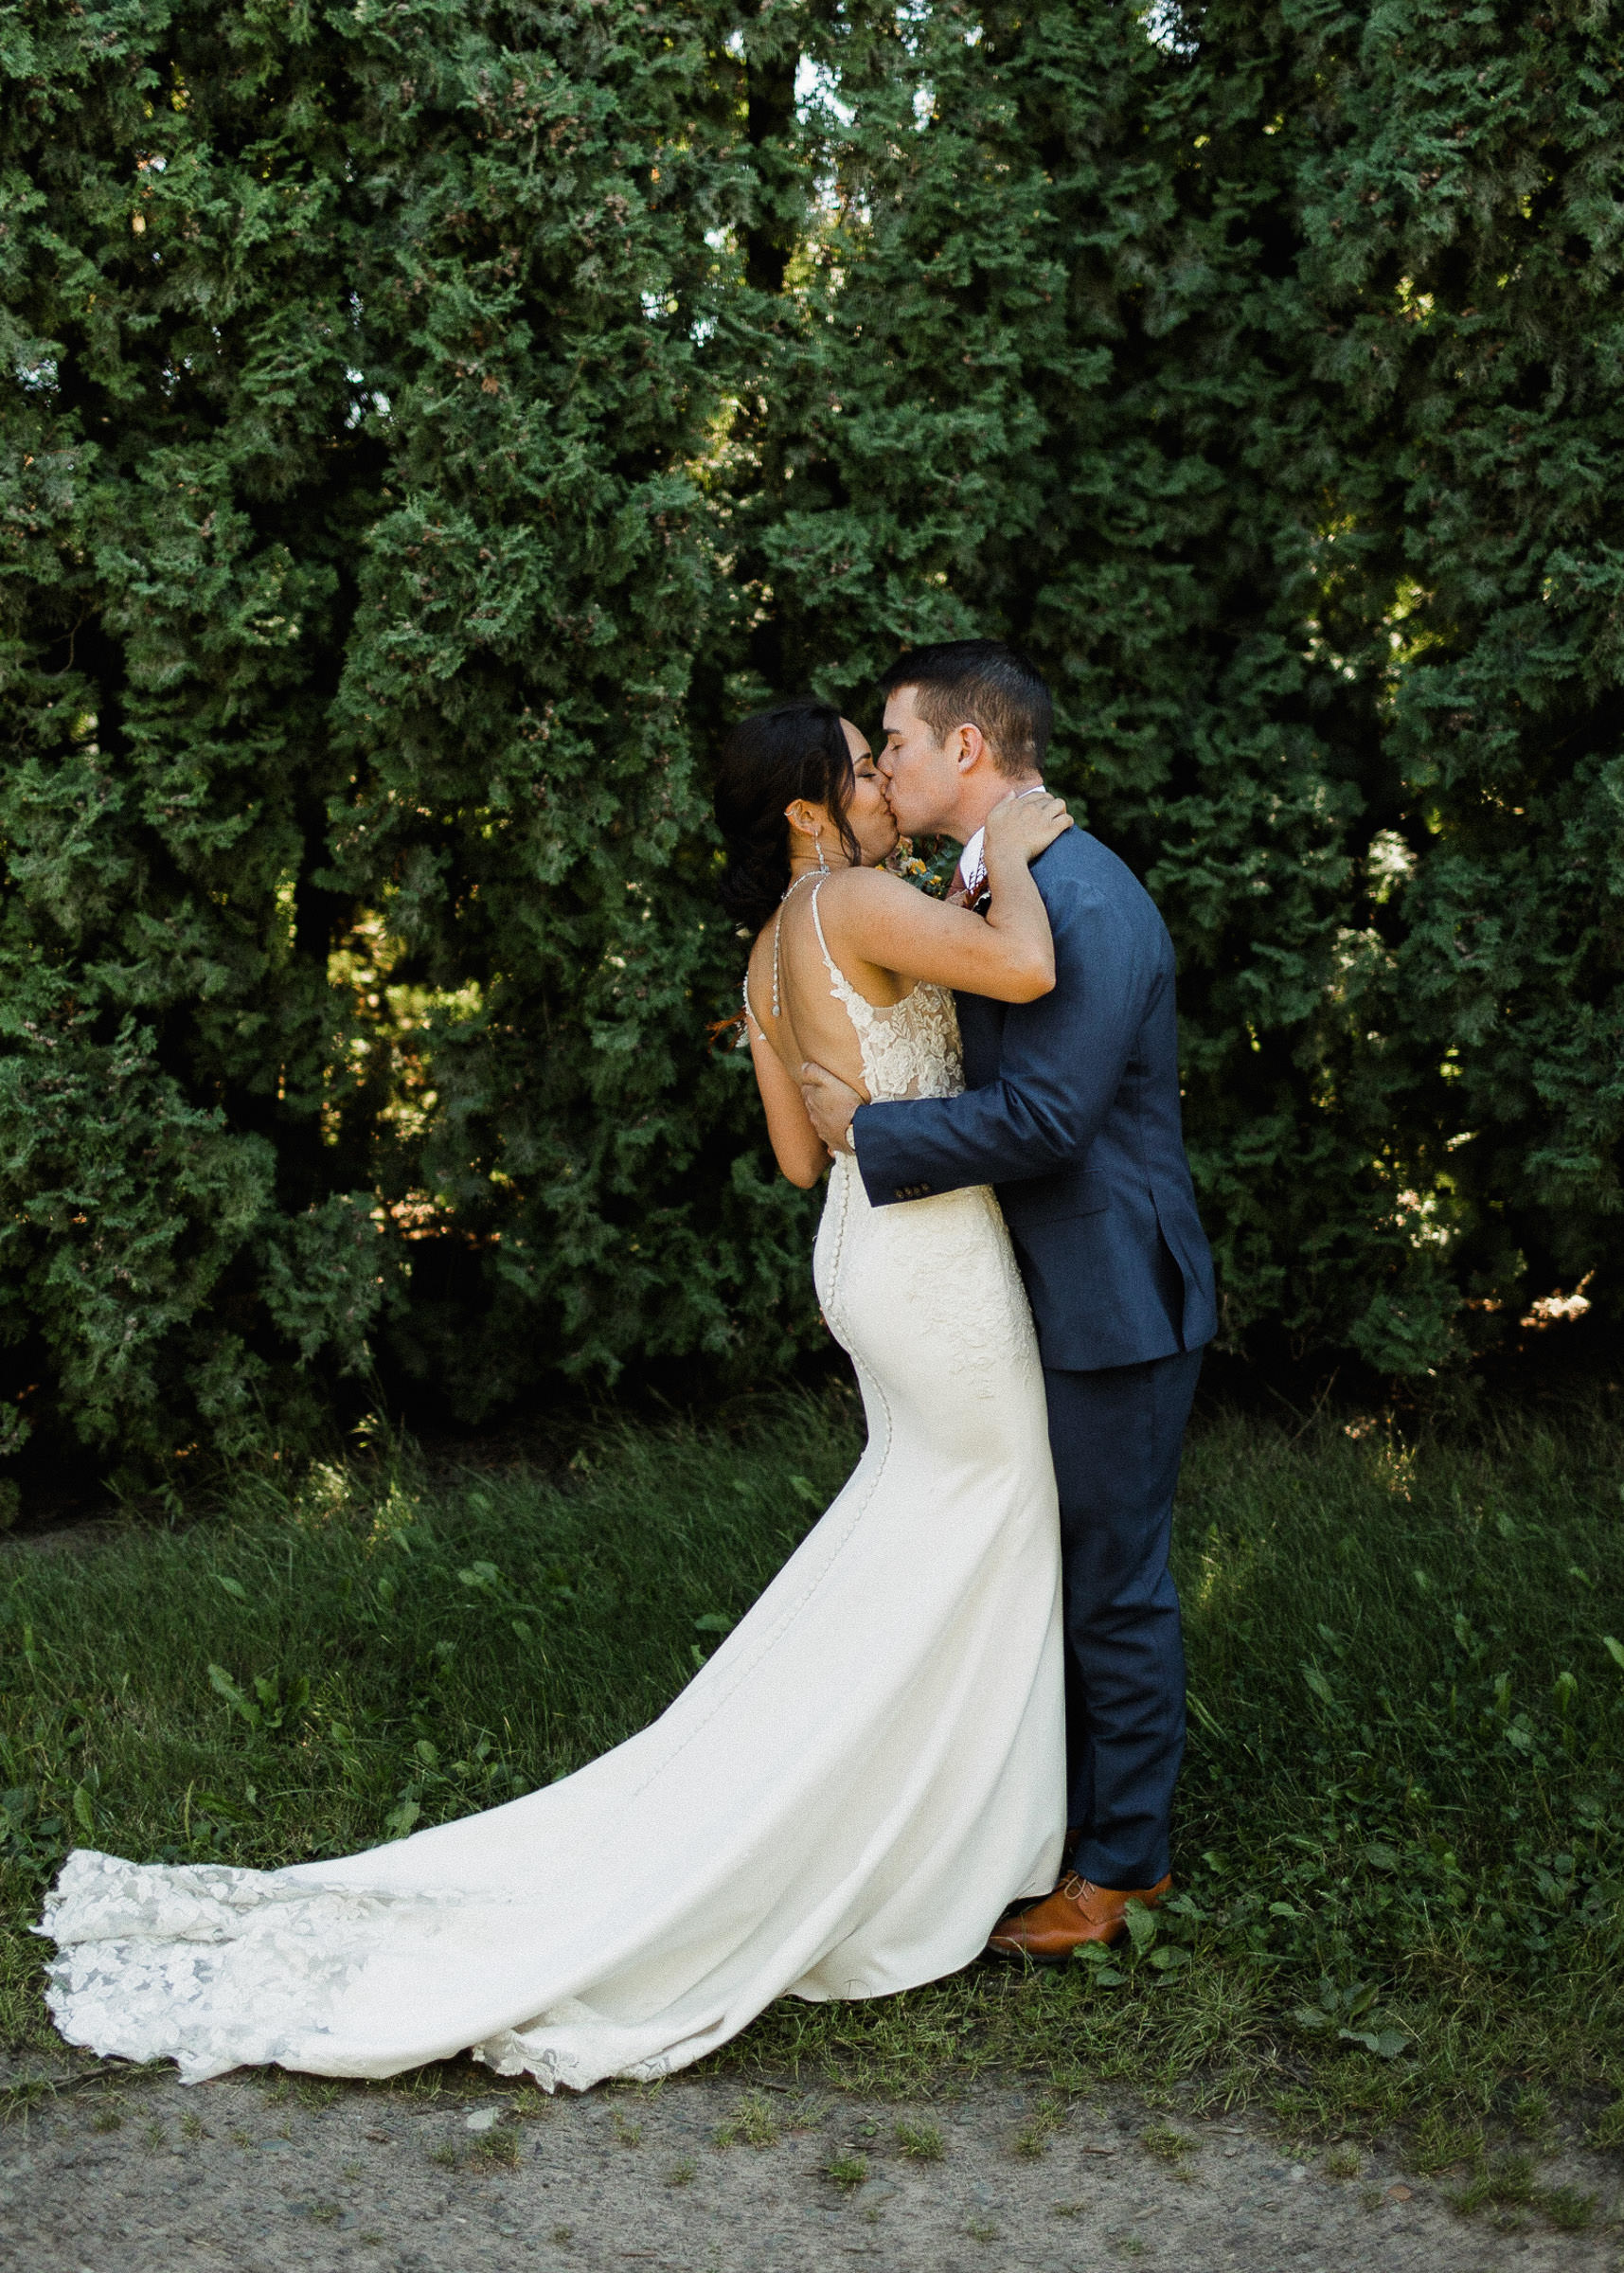 Bride and groom kiss during a first look in front of a row of hedge trees